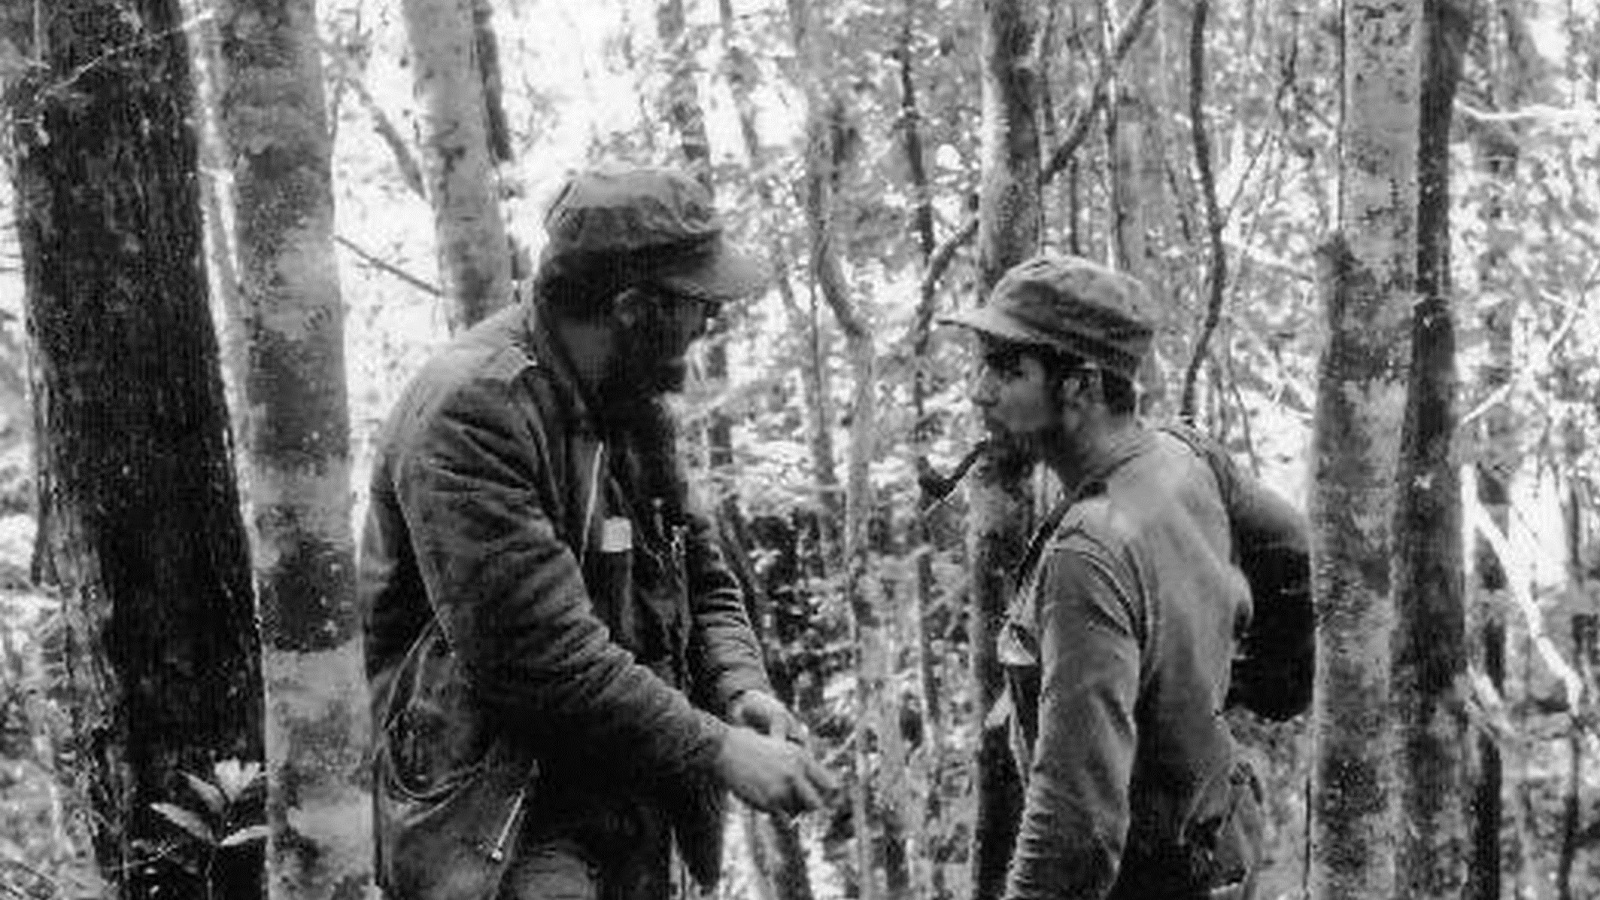 (FILE) A file picture dated 08 October 1957 shows Cuban leader Fidel Castro (L) conversing with Argentina born legendary figure of the Cuban Revolution, Ernesto 'Che' Guevara (R), in the woods of the Sierra Maestra, Cuba. According to a Cuban state TV broadcast, Cuban former President Fidel Castro has died at the age of 90 on 25 November 2016.  EPA/STR B/W ONLY